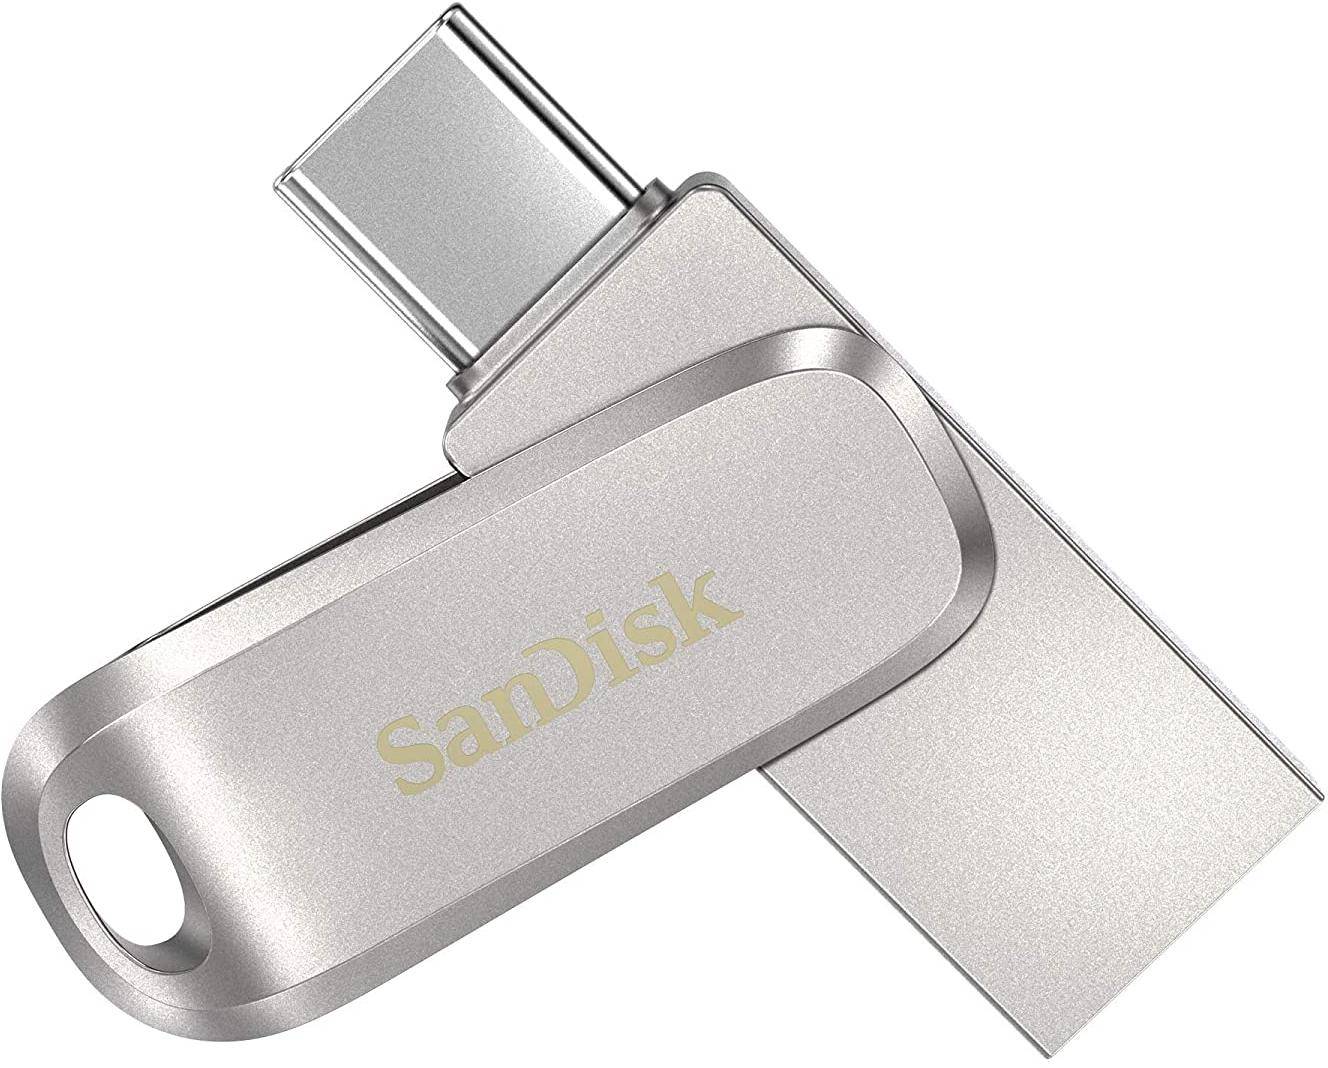 SanDisk Ultra Dual Drive Luxe 64GB Type-C Flash Drive(SDDDC4-064G-I35) zoom image